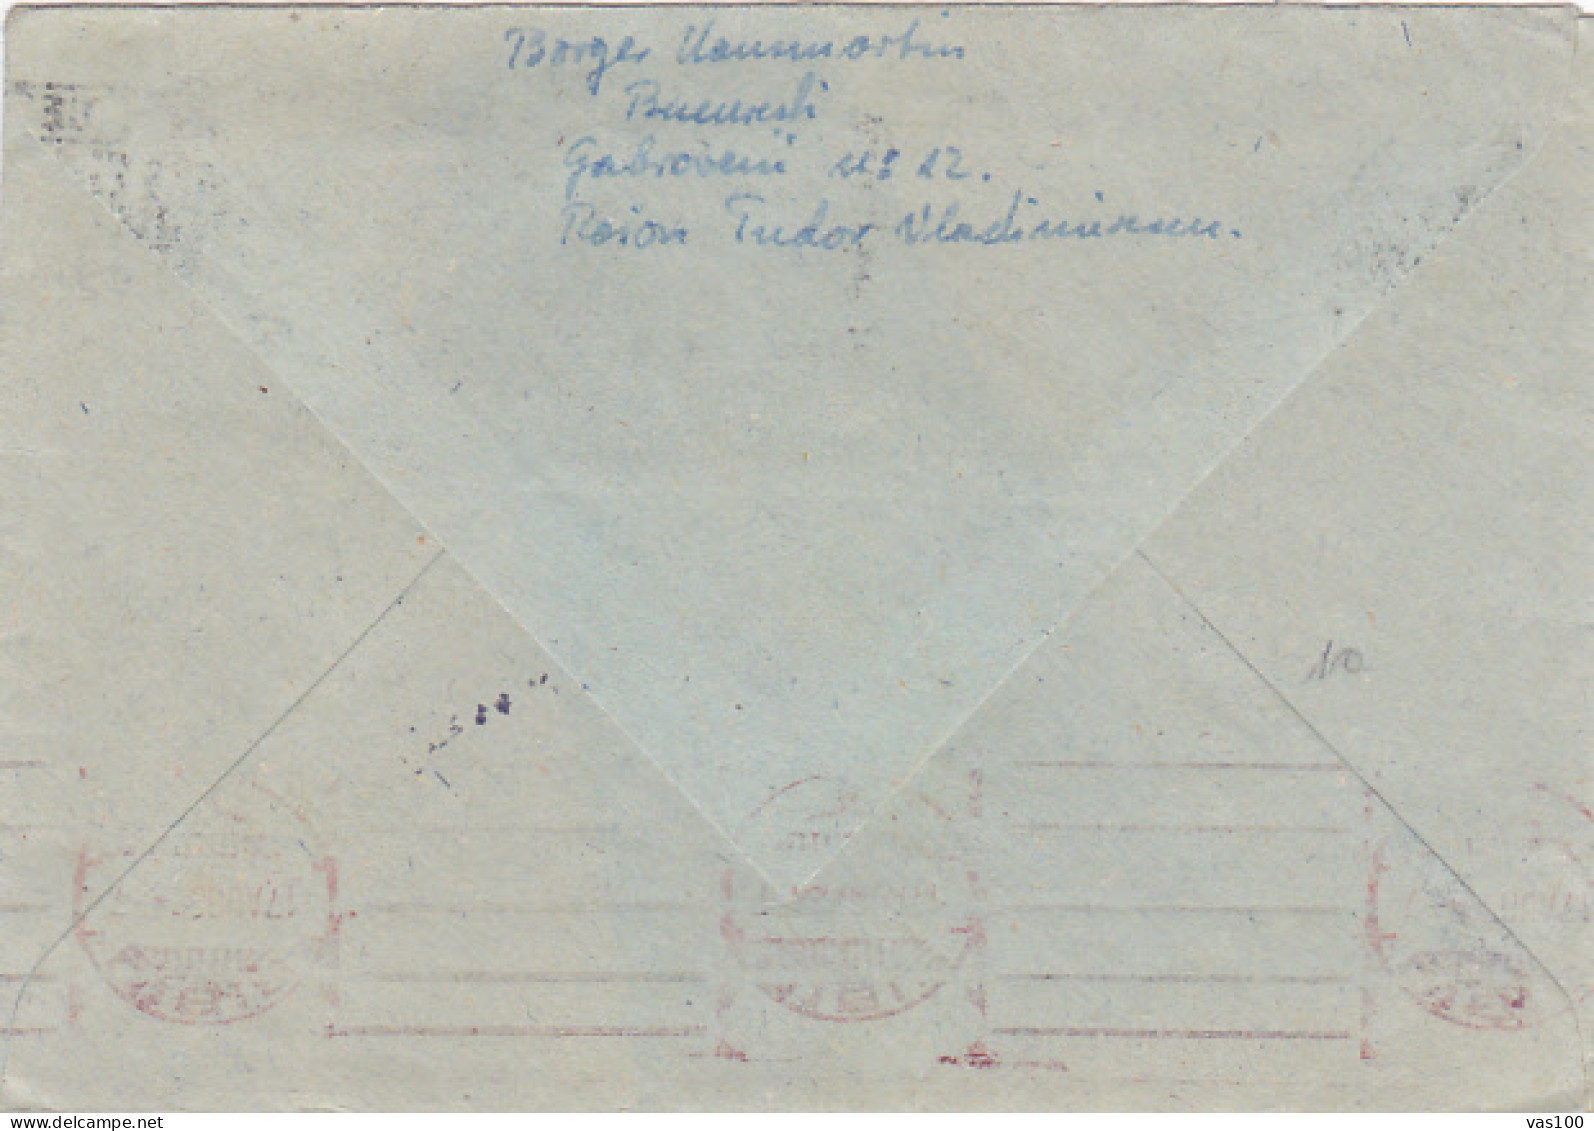 POSTAL SERTVICES SPECIAL POSTMARKS, REPUBLIC COAT OF ARMS STAMP ON COVER WITH LETTER, 1952, ROMANIA - Covers & Documents